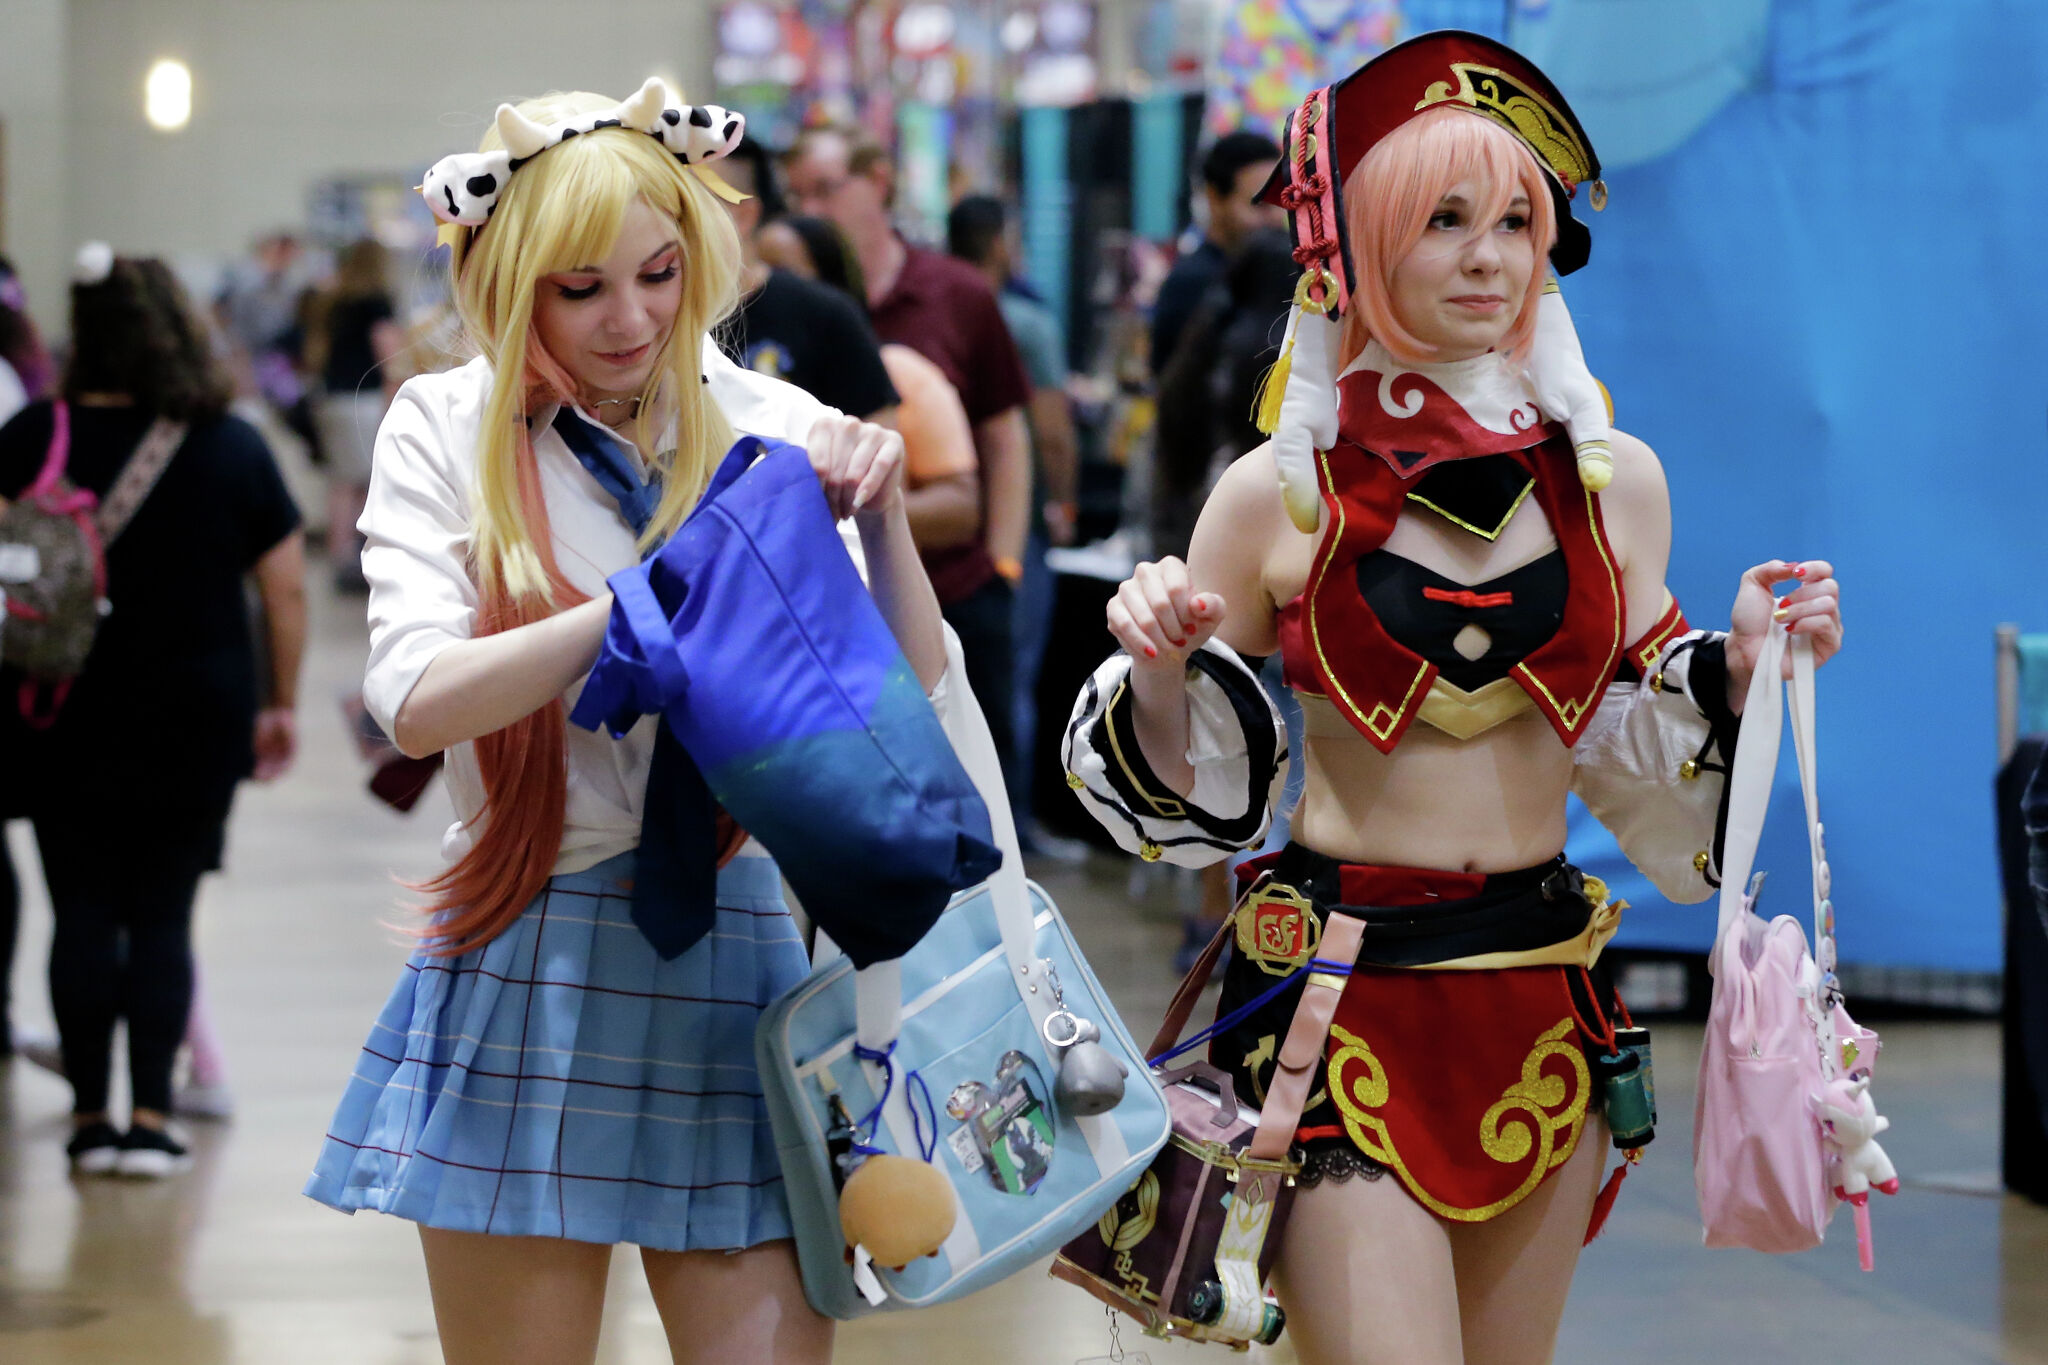 Houston Comic Con fans feel scammed after convention reschedules